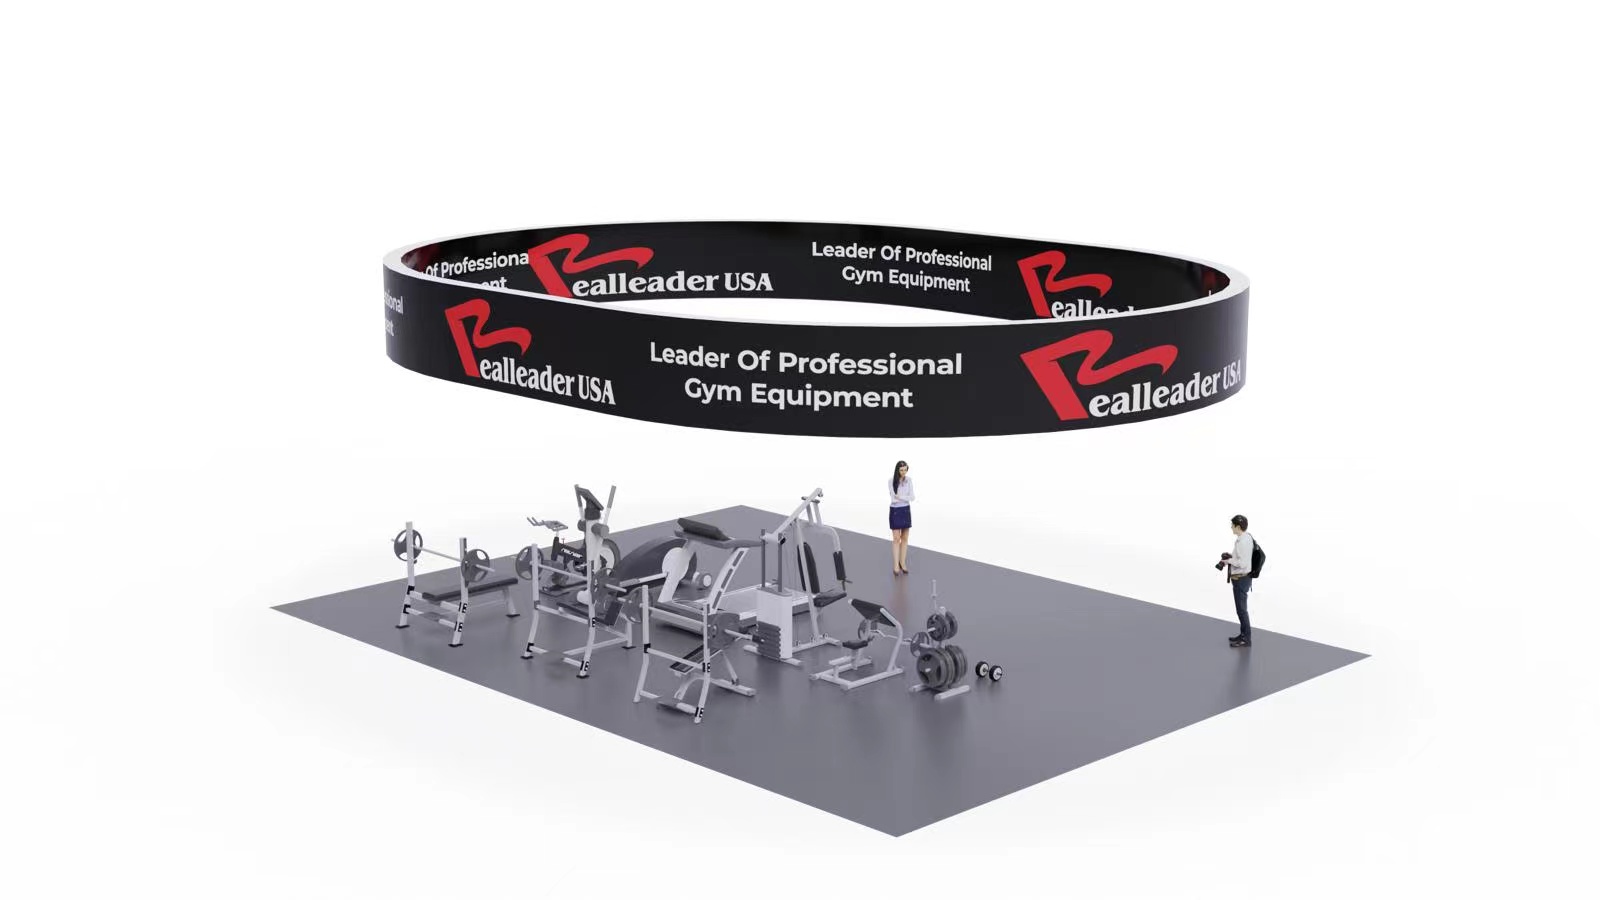 Come See Realleader At Booth 1124 In Ihrsa At March 20 to 22